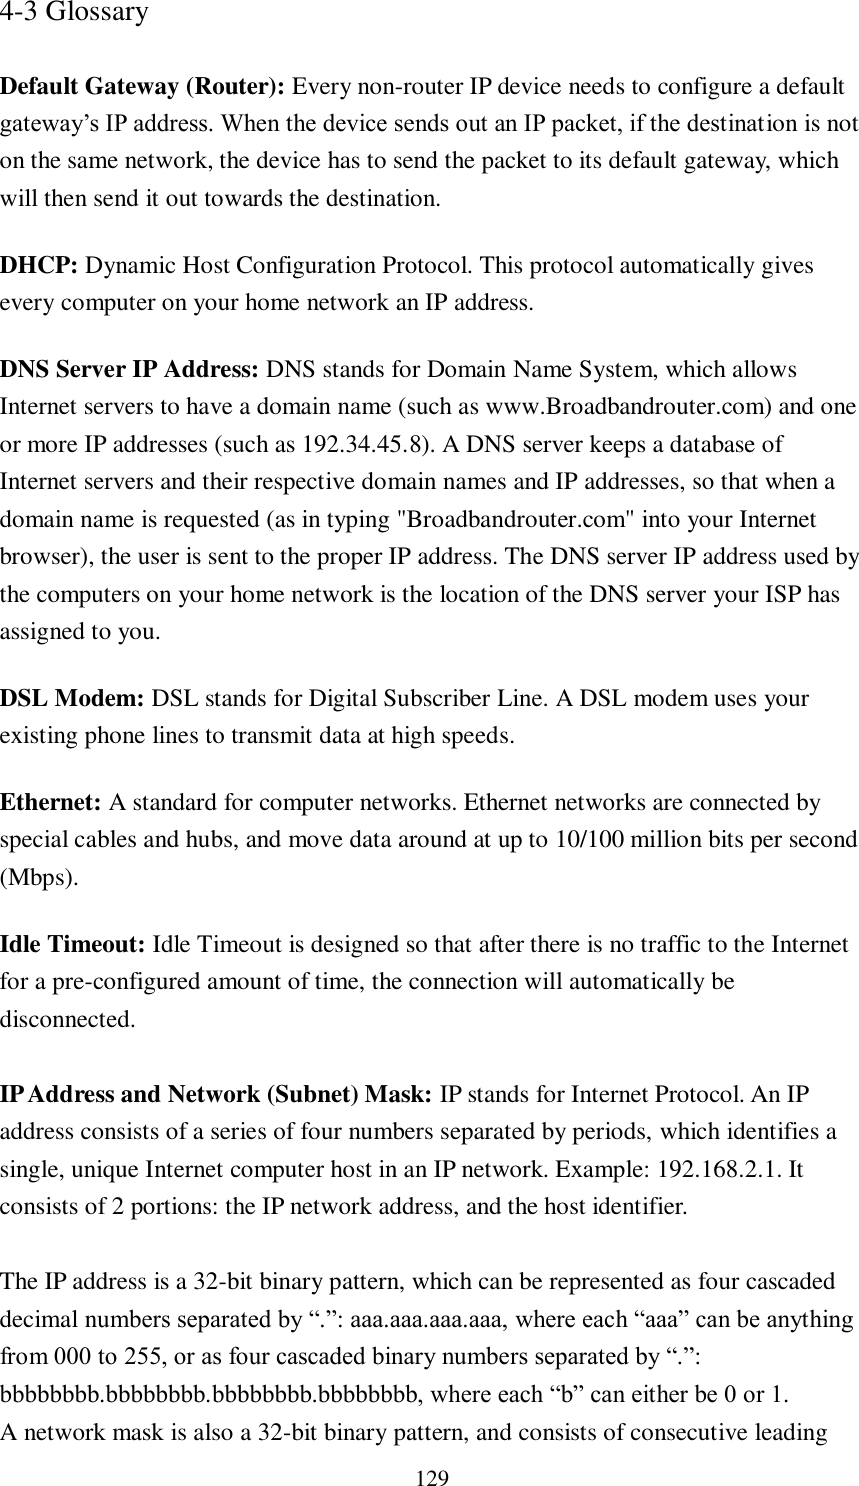 129 4-3 Glossary  Default Gateway (Router): Every non-router IP device needs to configure a default gateway‟s IP address. When the device sends out an IP packet, if the destination is not on the same network, the device has to send the packet to its default gateway, which will then send it out towards the destination. DHCP: Dynamic Host Configuration Protocol. This protocol automatically gives every computer on your home network an IP address. DNS Server IP Address: DNS stands for Domain Name System, which allows Internet servers to have a domain name (such as www.Broadbandrouter.com) and one or more IP addresses (such as 192.34.45.8). A DNS server keeps a database of Internet servers and their respective domain names and IP addresses, so that when a domain name is requested (as in typing &quot;Broadbandrouter.com&quot; into your Internet browser), the user is sent to the proper IP address. The DNS server IP address used by the computers on your home network is the location of the DNS server your ISP has assigned to you.   DSL Modem: DSL stands for Digital Subscriber Line. A DSL modem uses your existing phone lines to transmit data at high speeds.   Ethernet: A standard for computer networks. Ethernet networks are connected by special cables and hubs, and move data around at up to 10/100 million bits per second (Mbps).   Idle Timeout: Idle Timeout is designed so that after there is no traffic to the Internet for a pre-configured amount of time, the connection will automatically be disconnected.  IP Address and Network (Subnet) Mask: IP stands for Internet Protocol. An IP address consists of a series of four numbers separated by periods, which identifies a single, unique Internet computer host in an IP network. Example: 192.168.2.1. It consists of 2 portions: the IP network address, and the host identifier.  The IP address is a 32-bit binary pattern, which can be represented as four cascaded decimal numbers separated by “.”: aaa.aaa.aaa.aaa, where each “aaa” can be anything from 000 to 255, or as four cascaded binary numbers separated by “.”: bbbbbbbb.bbbbbbbb.bbbbbbbb.bbbbbbbb, where each “b” can either be 0 or 1. A network mask is also a 32-bit binary pattern, and consists of consecutive leading 